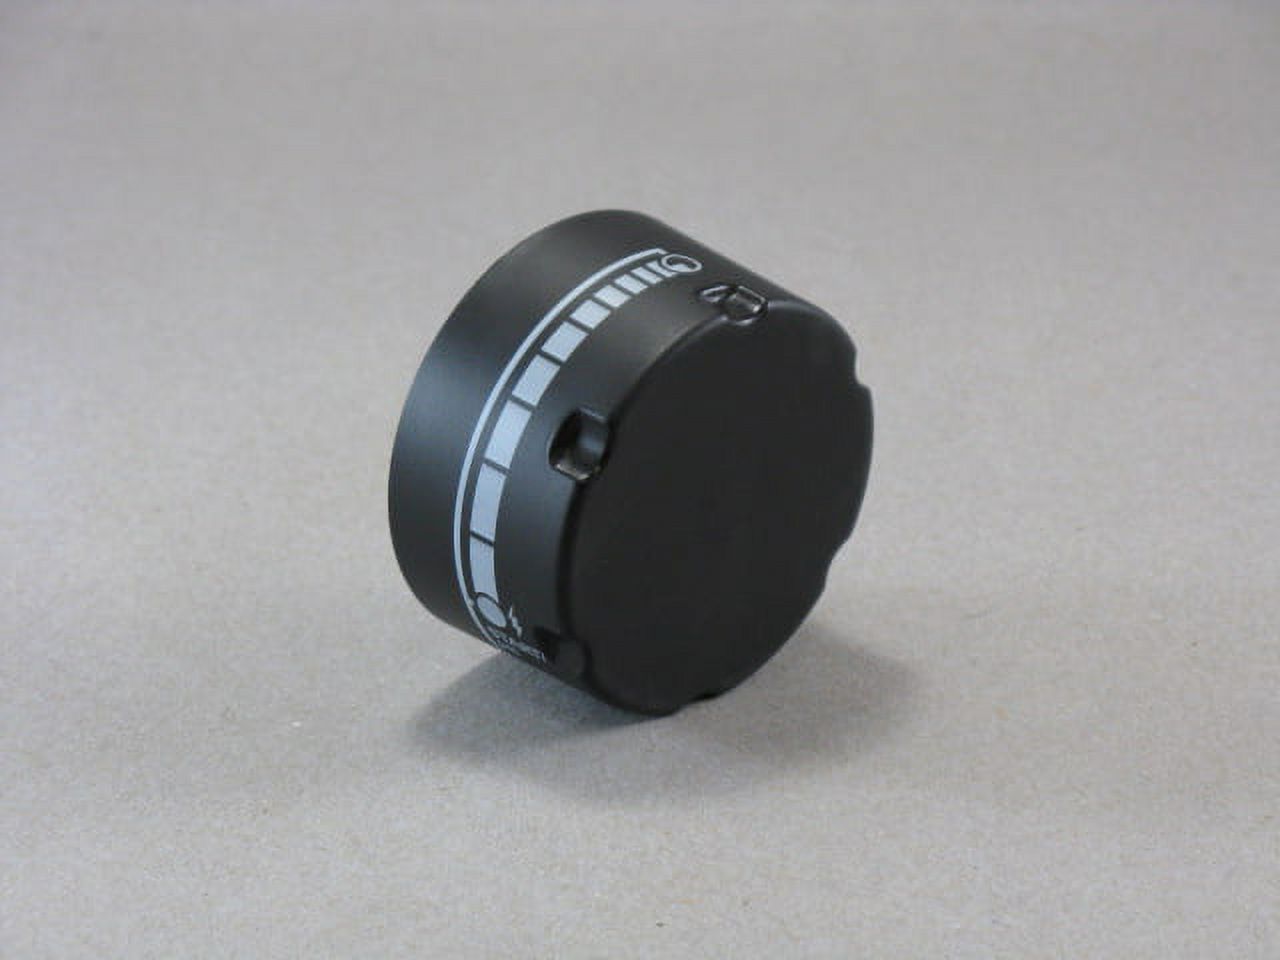 Weber Q200 Q220 Gas Grill Replacement Knob 41889 - image 1 of 1